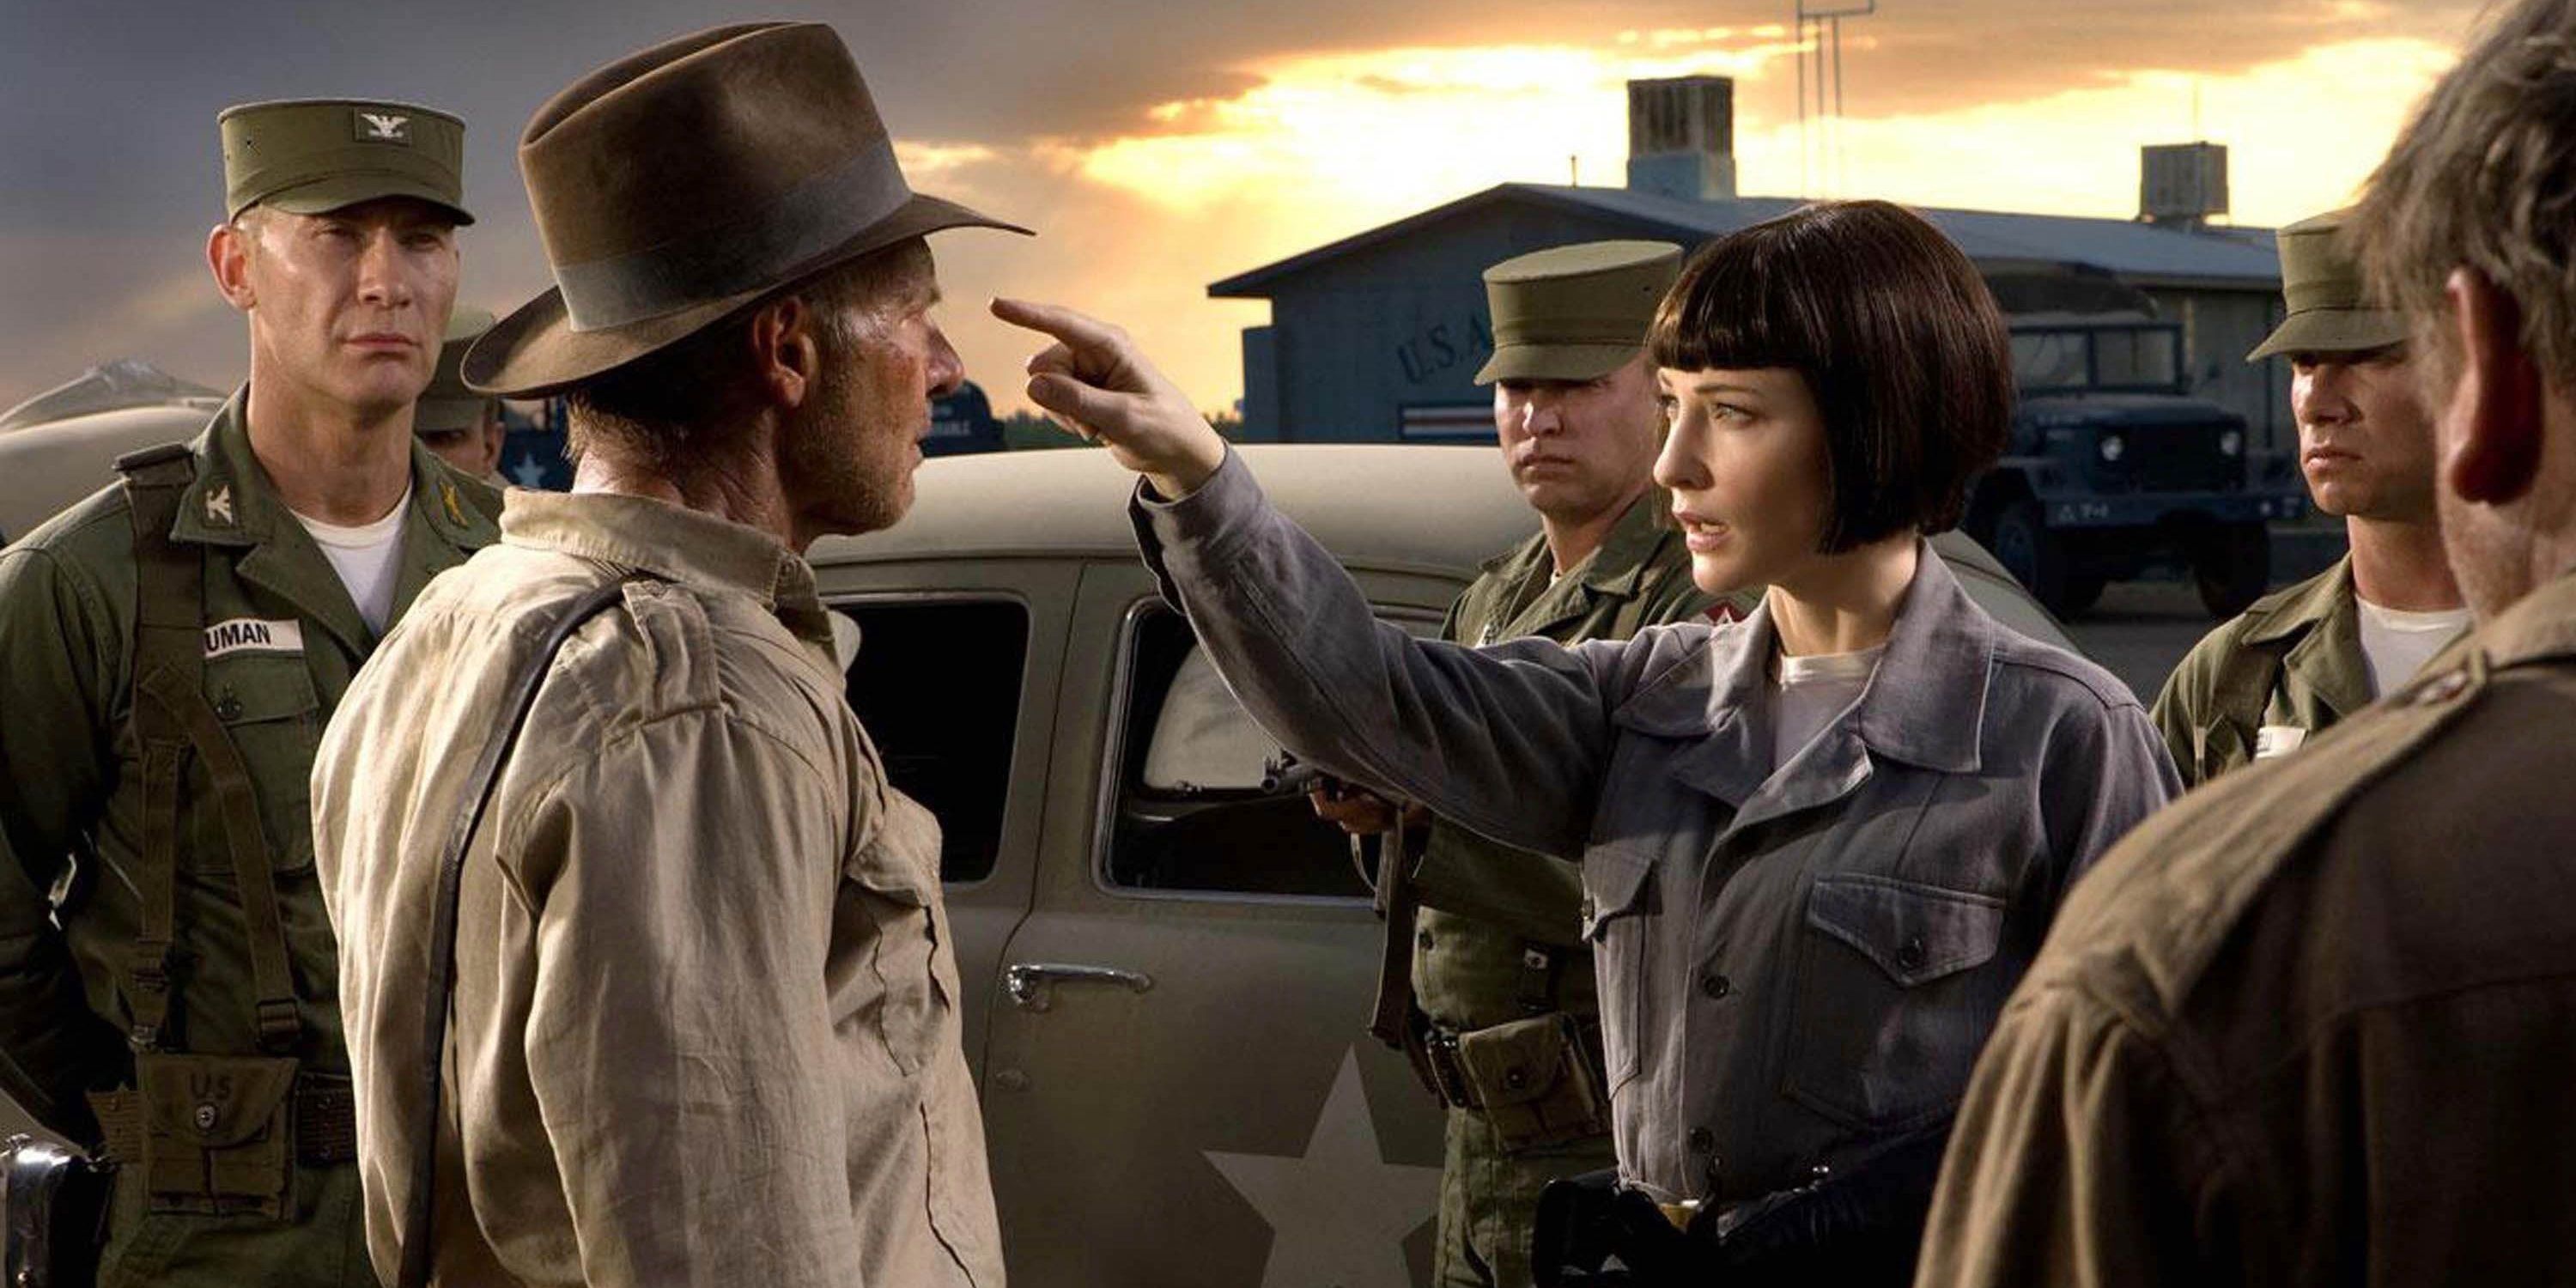 Harrison Ford and Cate Blanchett in Indiana Jones and the Kingdom of the Crystal Skull